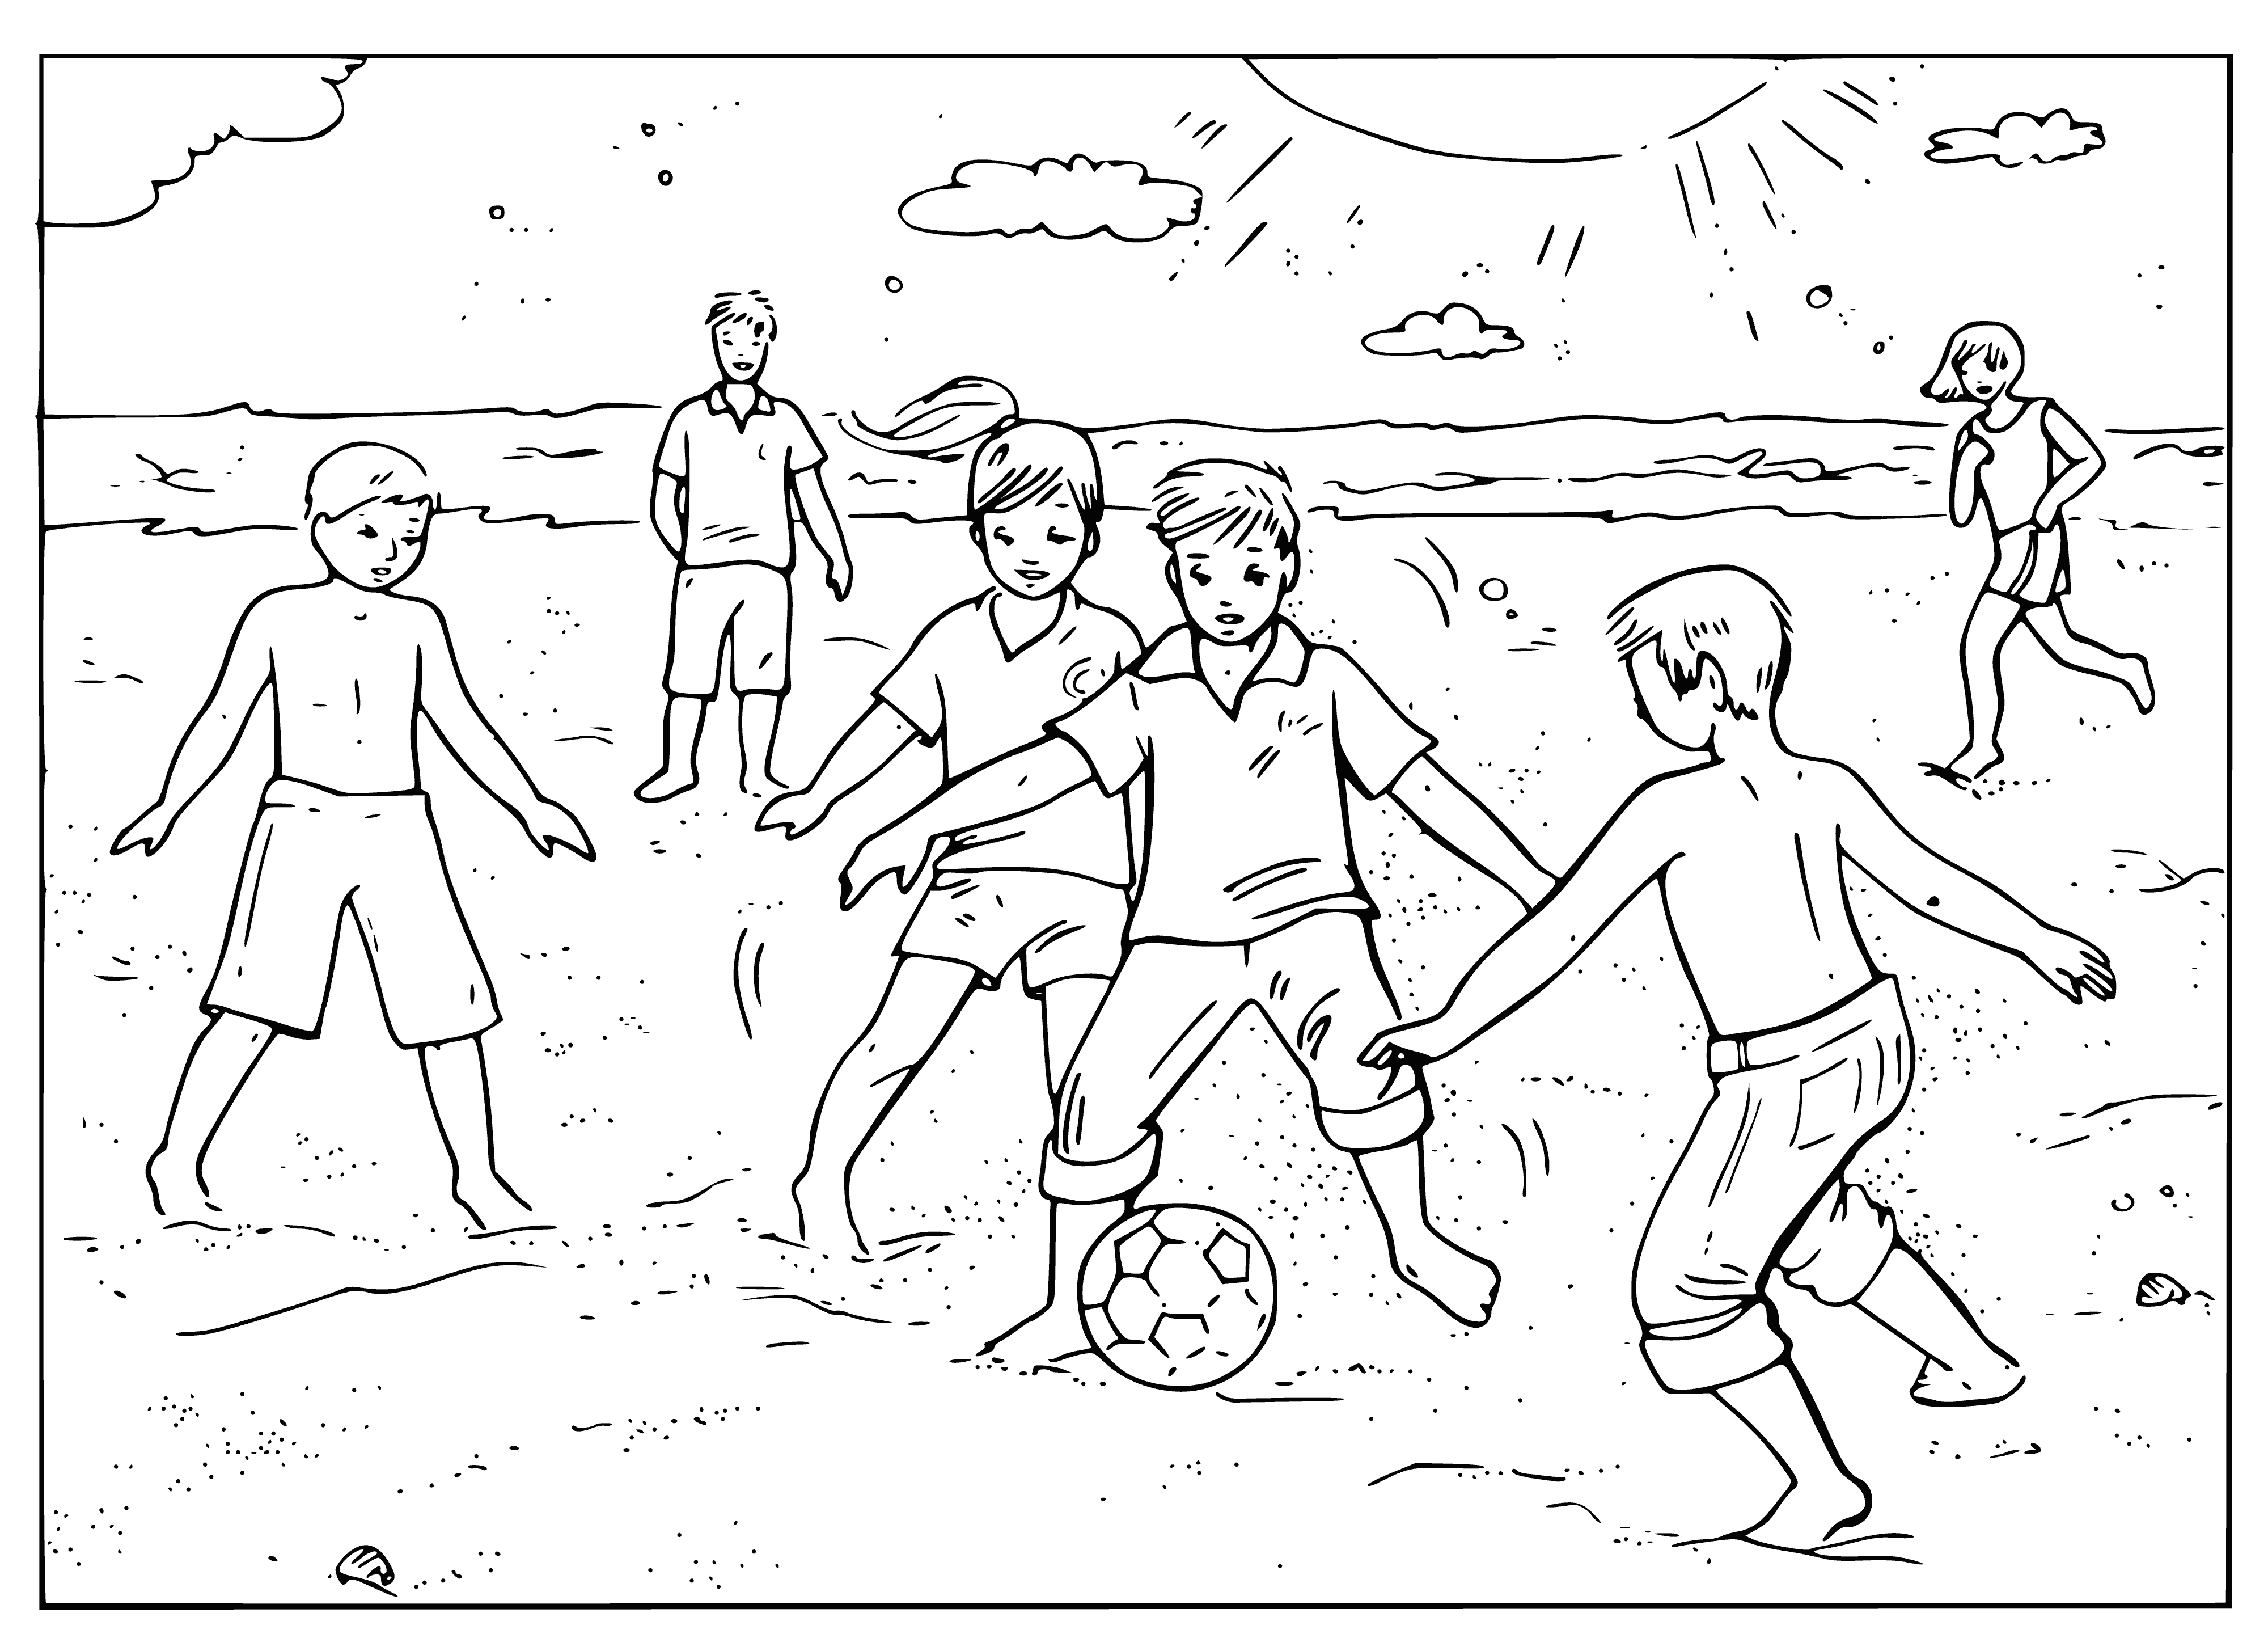 coloring page: Two people playing beach soccer with a soccer ball in the foreground against a beautiful orange and yellow sunset.